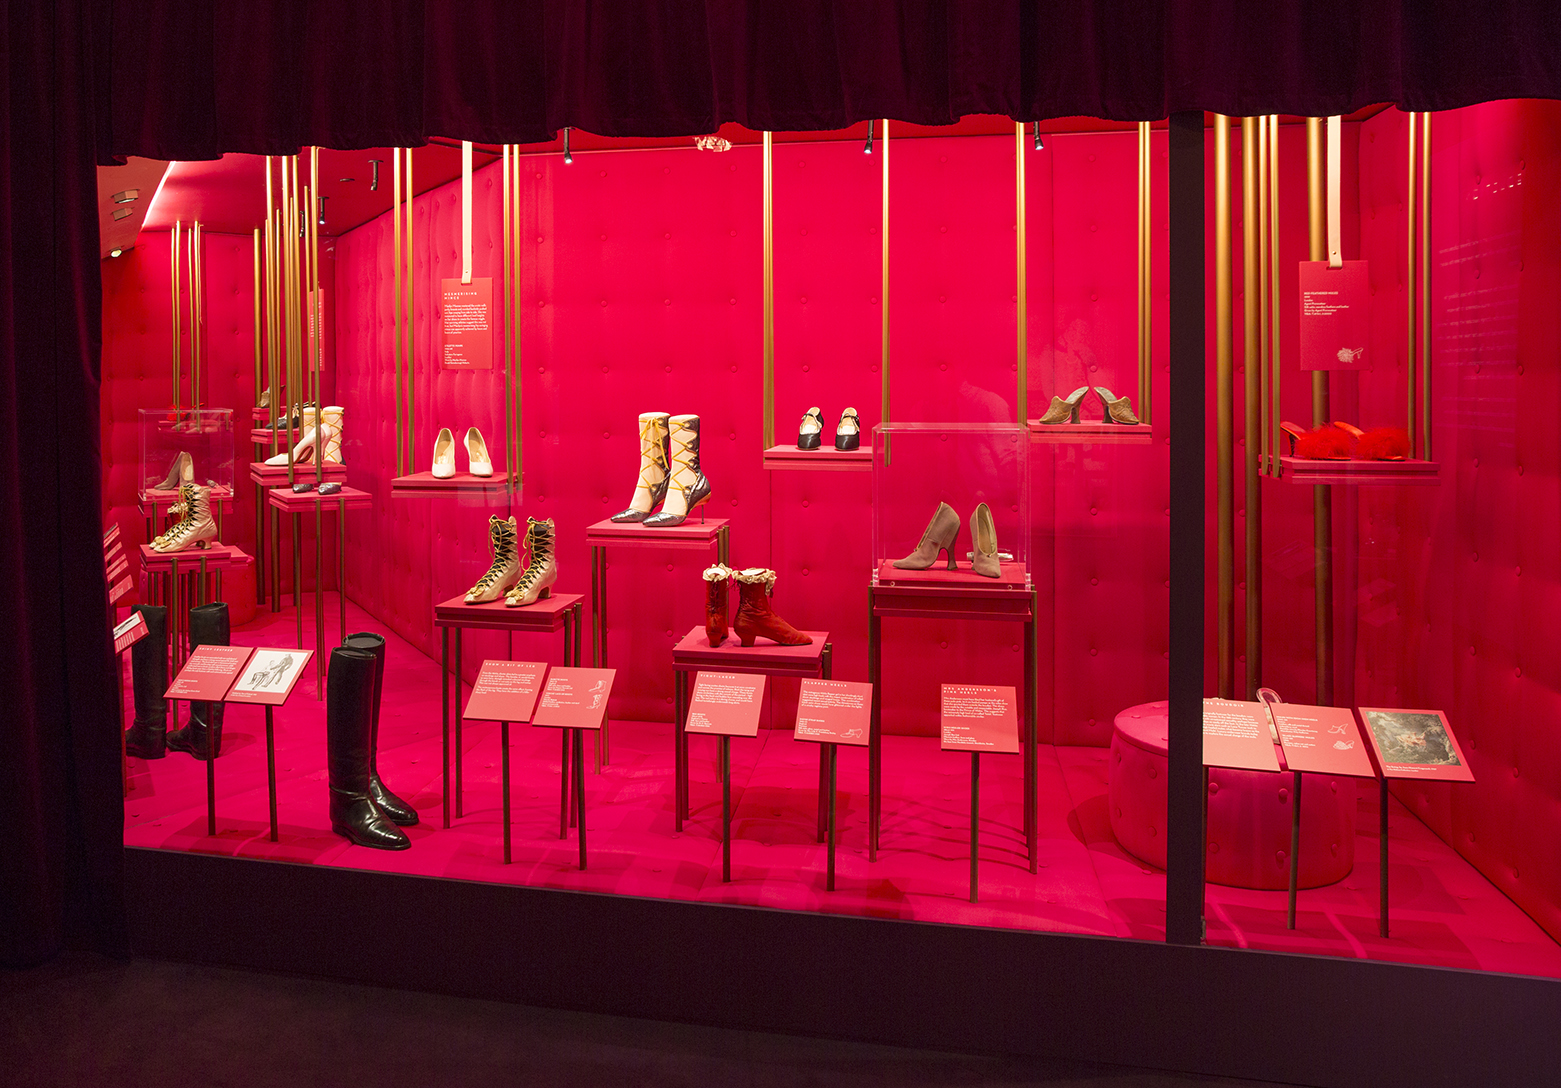 1._Installation_view_of_Shoes_Pleasure_and_Pain_13_June_2015_-_31_January_2016_c_Victoria_and_Albert_Museum_London